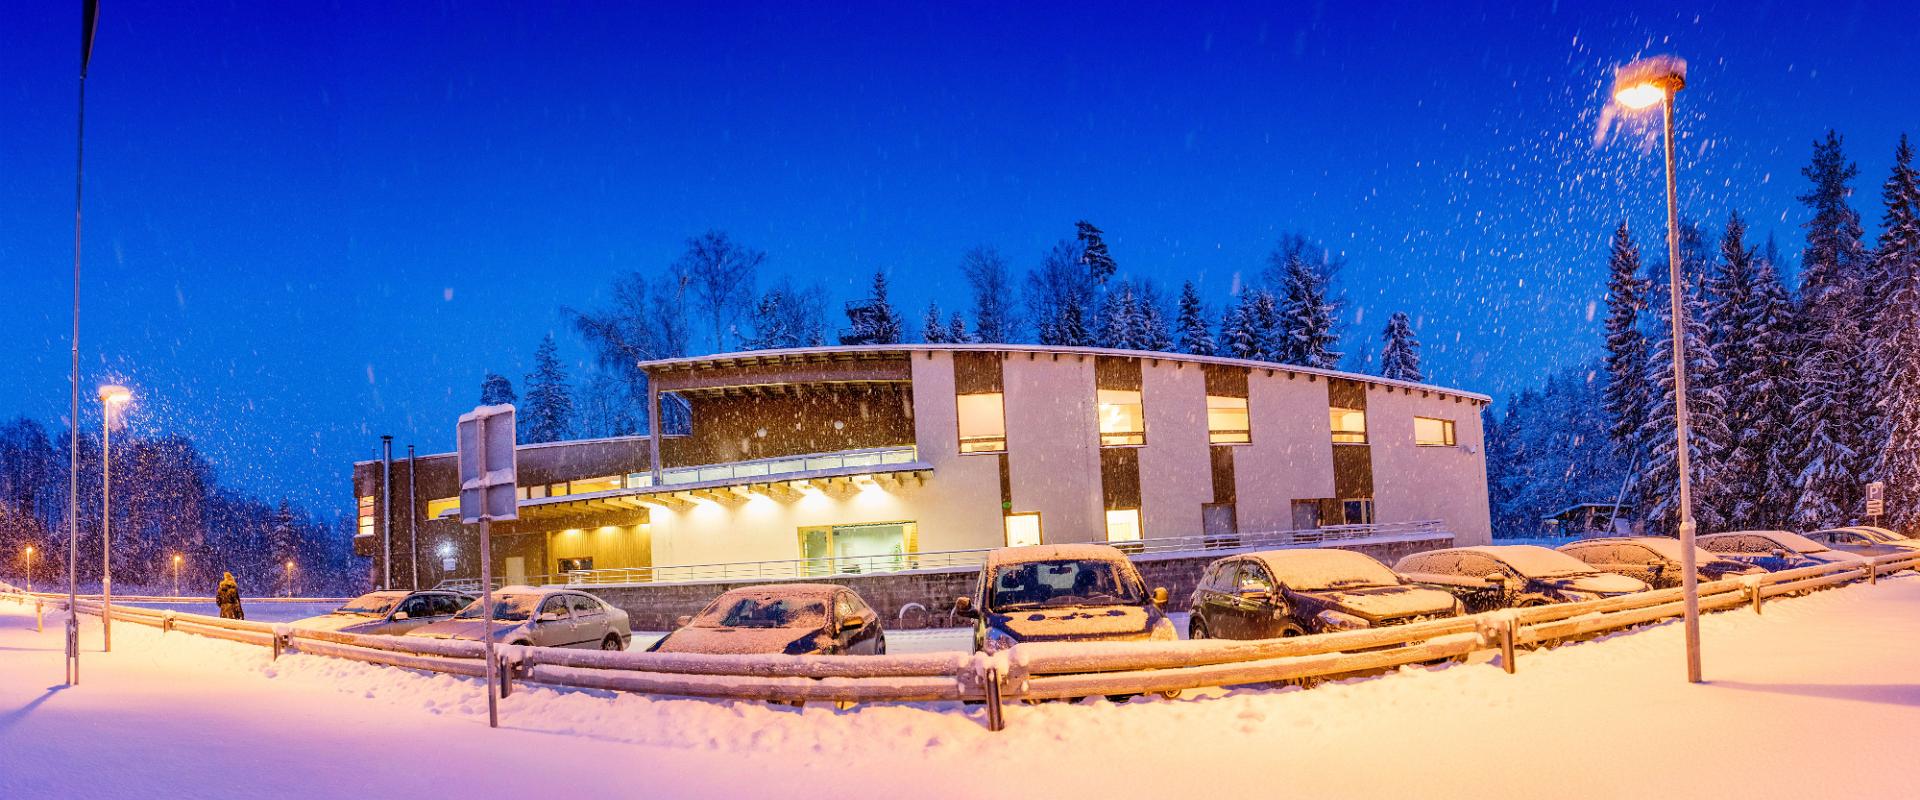 Viljandi County Sports and Recreation Centre, which is located in Holstre-Polli, boasts a number of well-tended forest tracks and trails which vary in